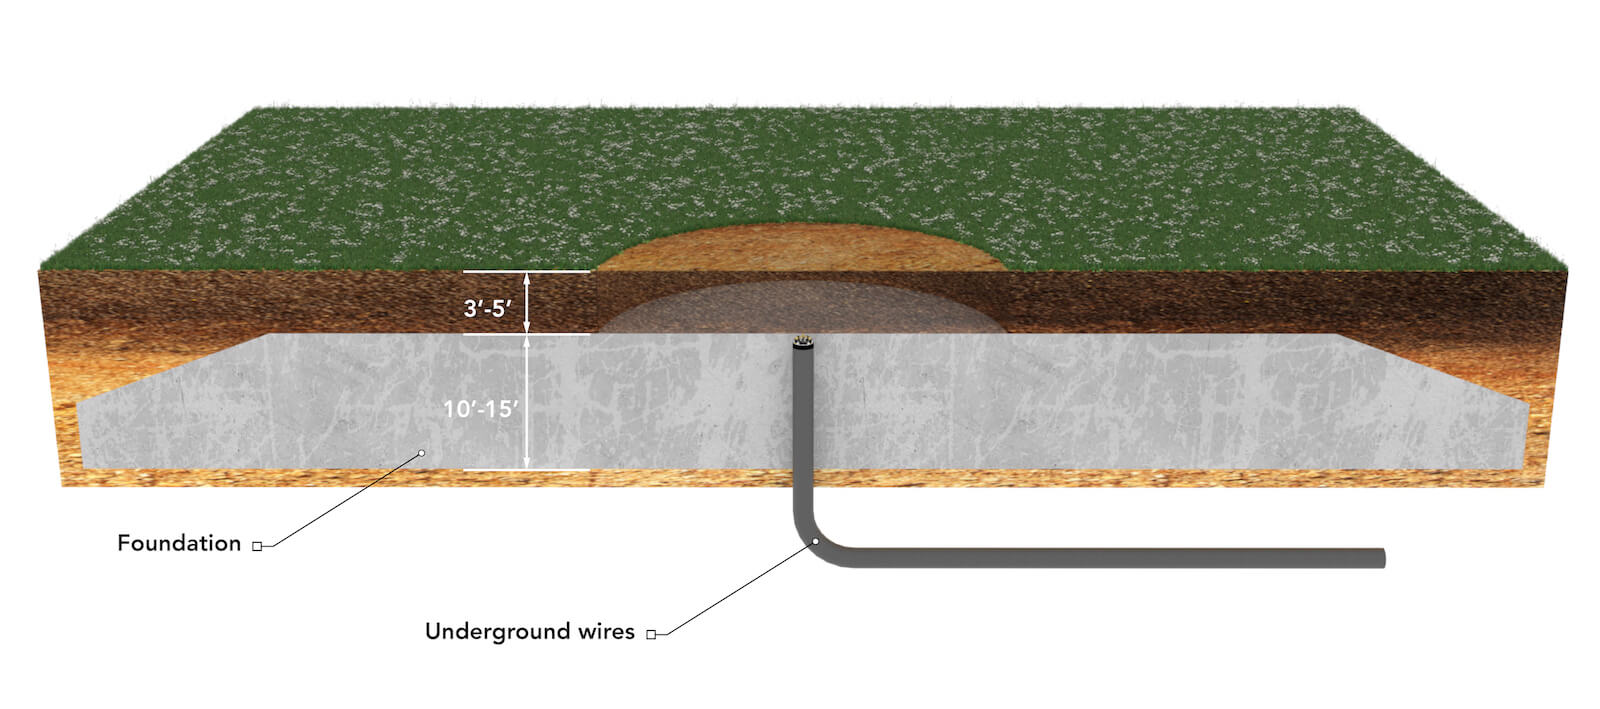 Illustration of a cut-away of the ground showing 3’–5’ of dirt above 10’–15’ of cement labeled “foundation” in which is implanted underground wires ~32’ from the edge, at the center of the foundation.